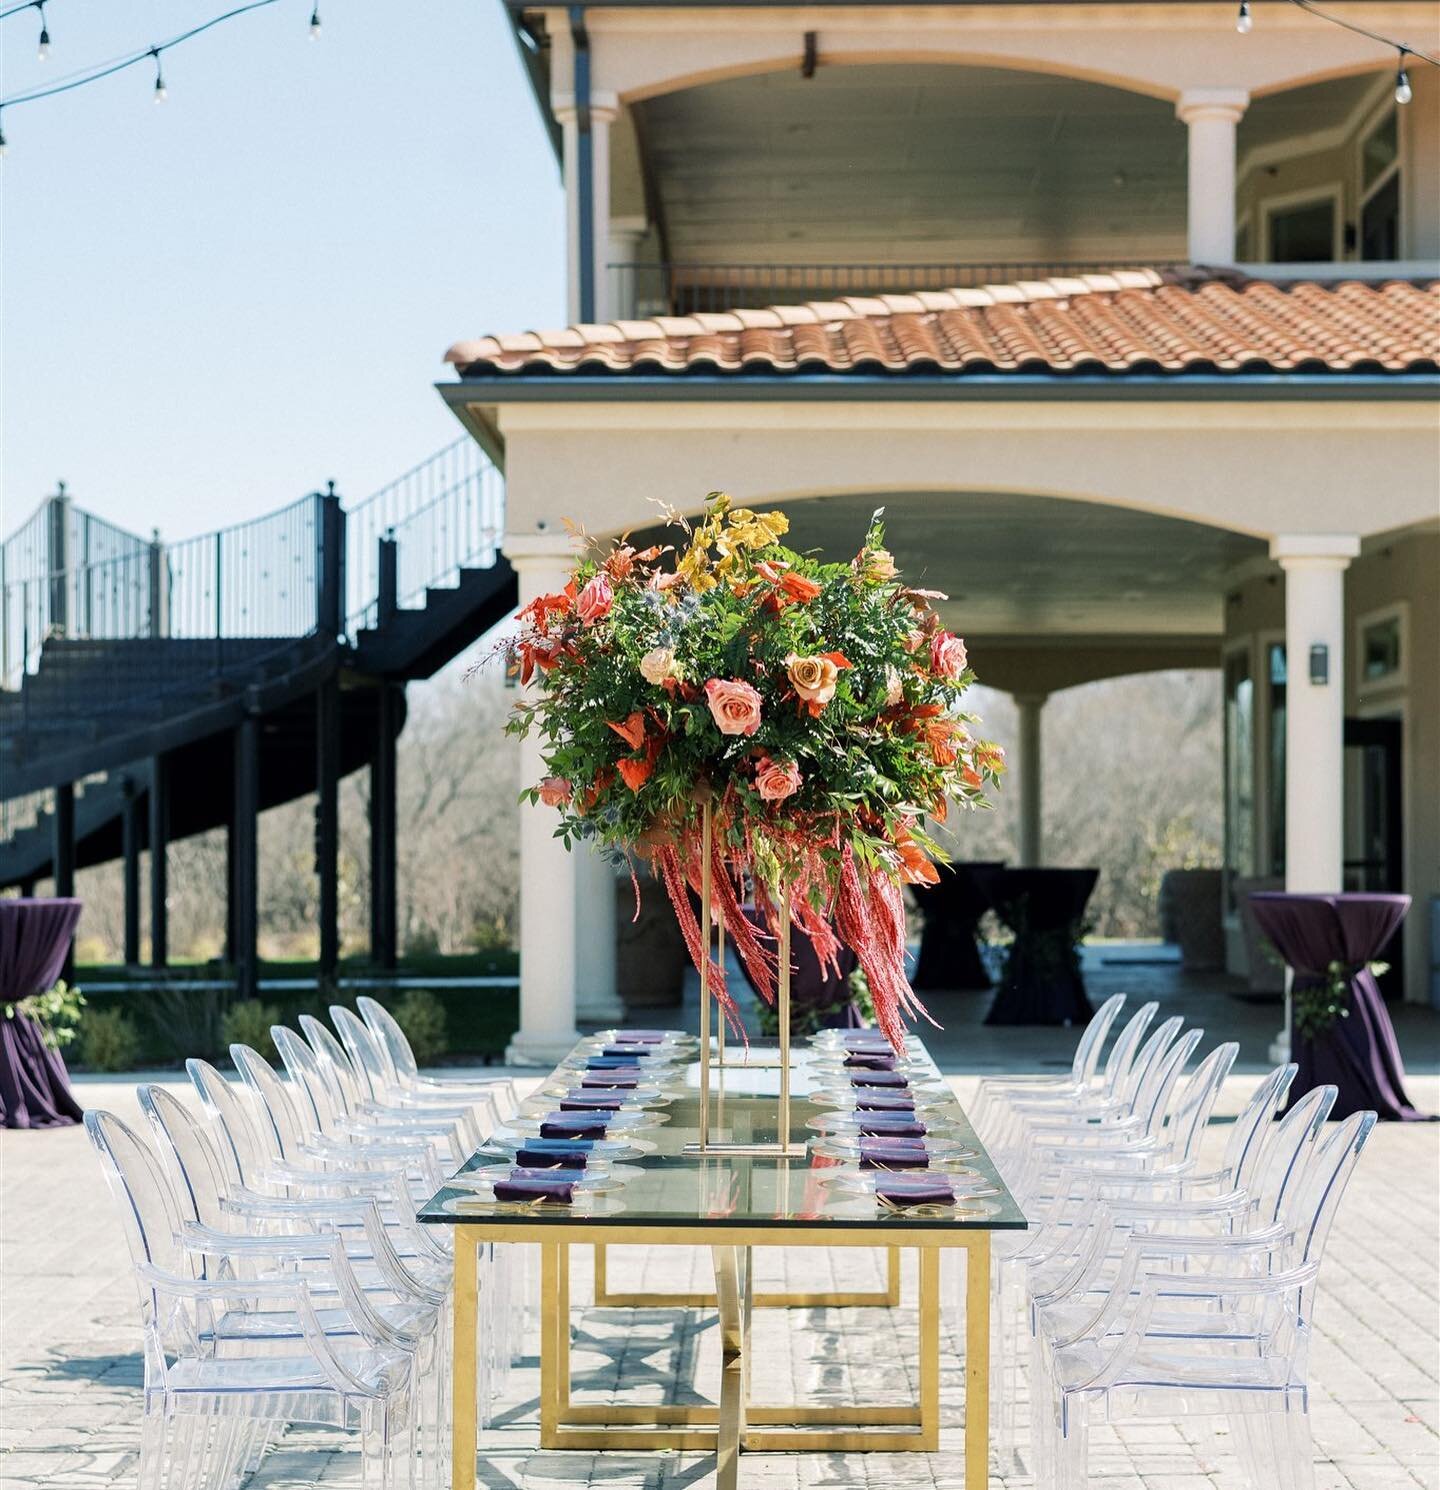 Throwing it back to our March open house where @weddingsbylavenders and @bigdpartyrentals produced this beautiful fall reception set up on the Piazza. 

#wedding #wife #bride #groom #weddingvenue #weddingflowers #weddingflorals #weddingrentals #fallw